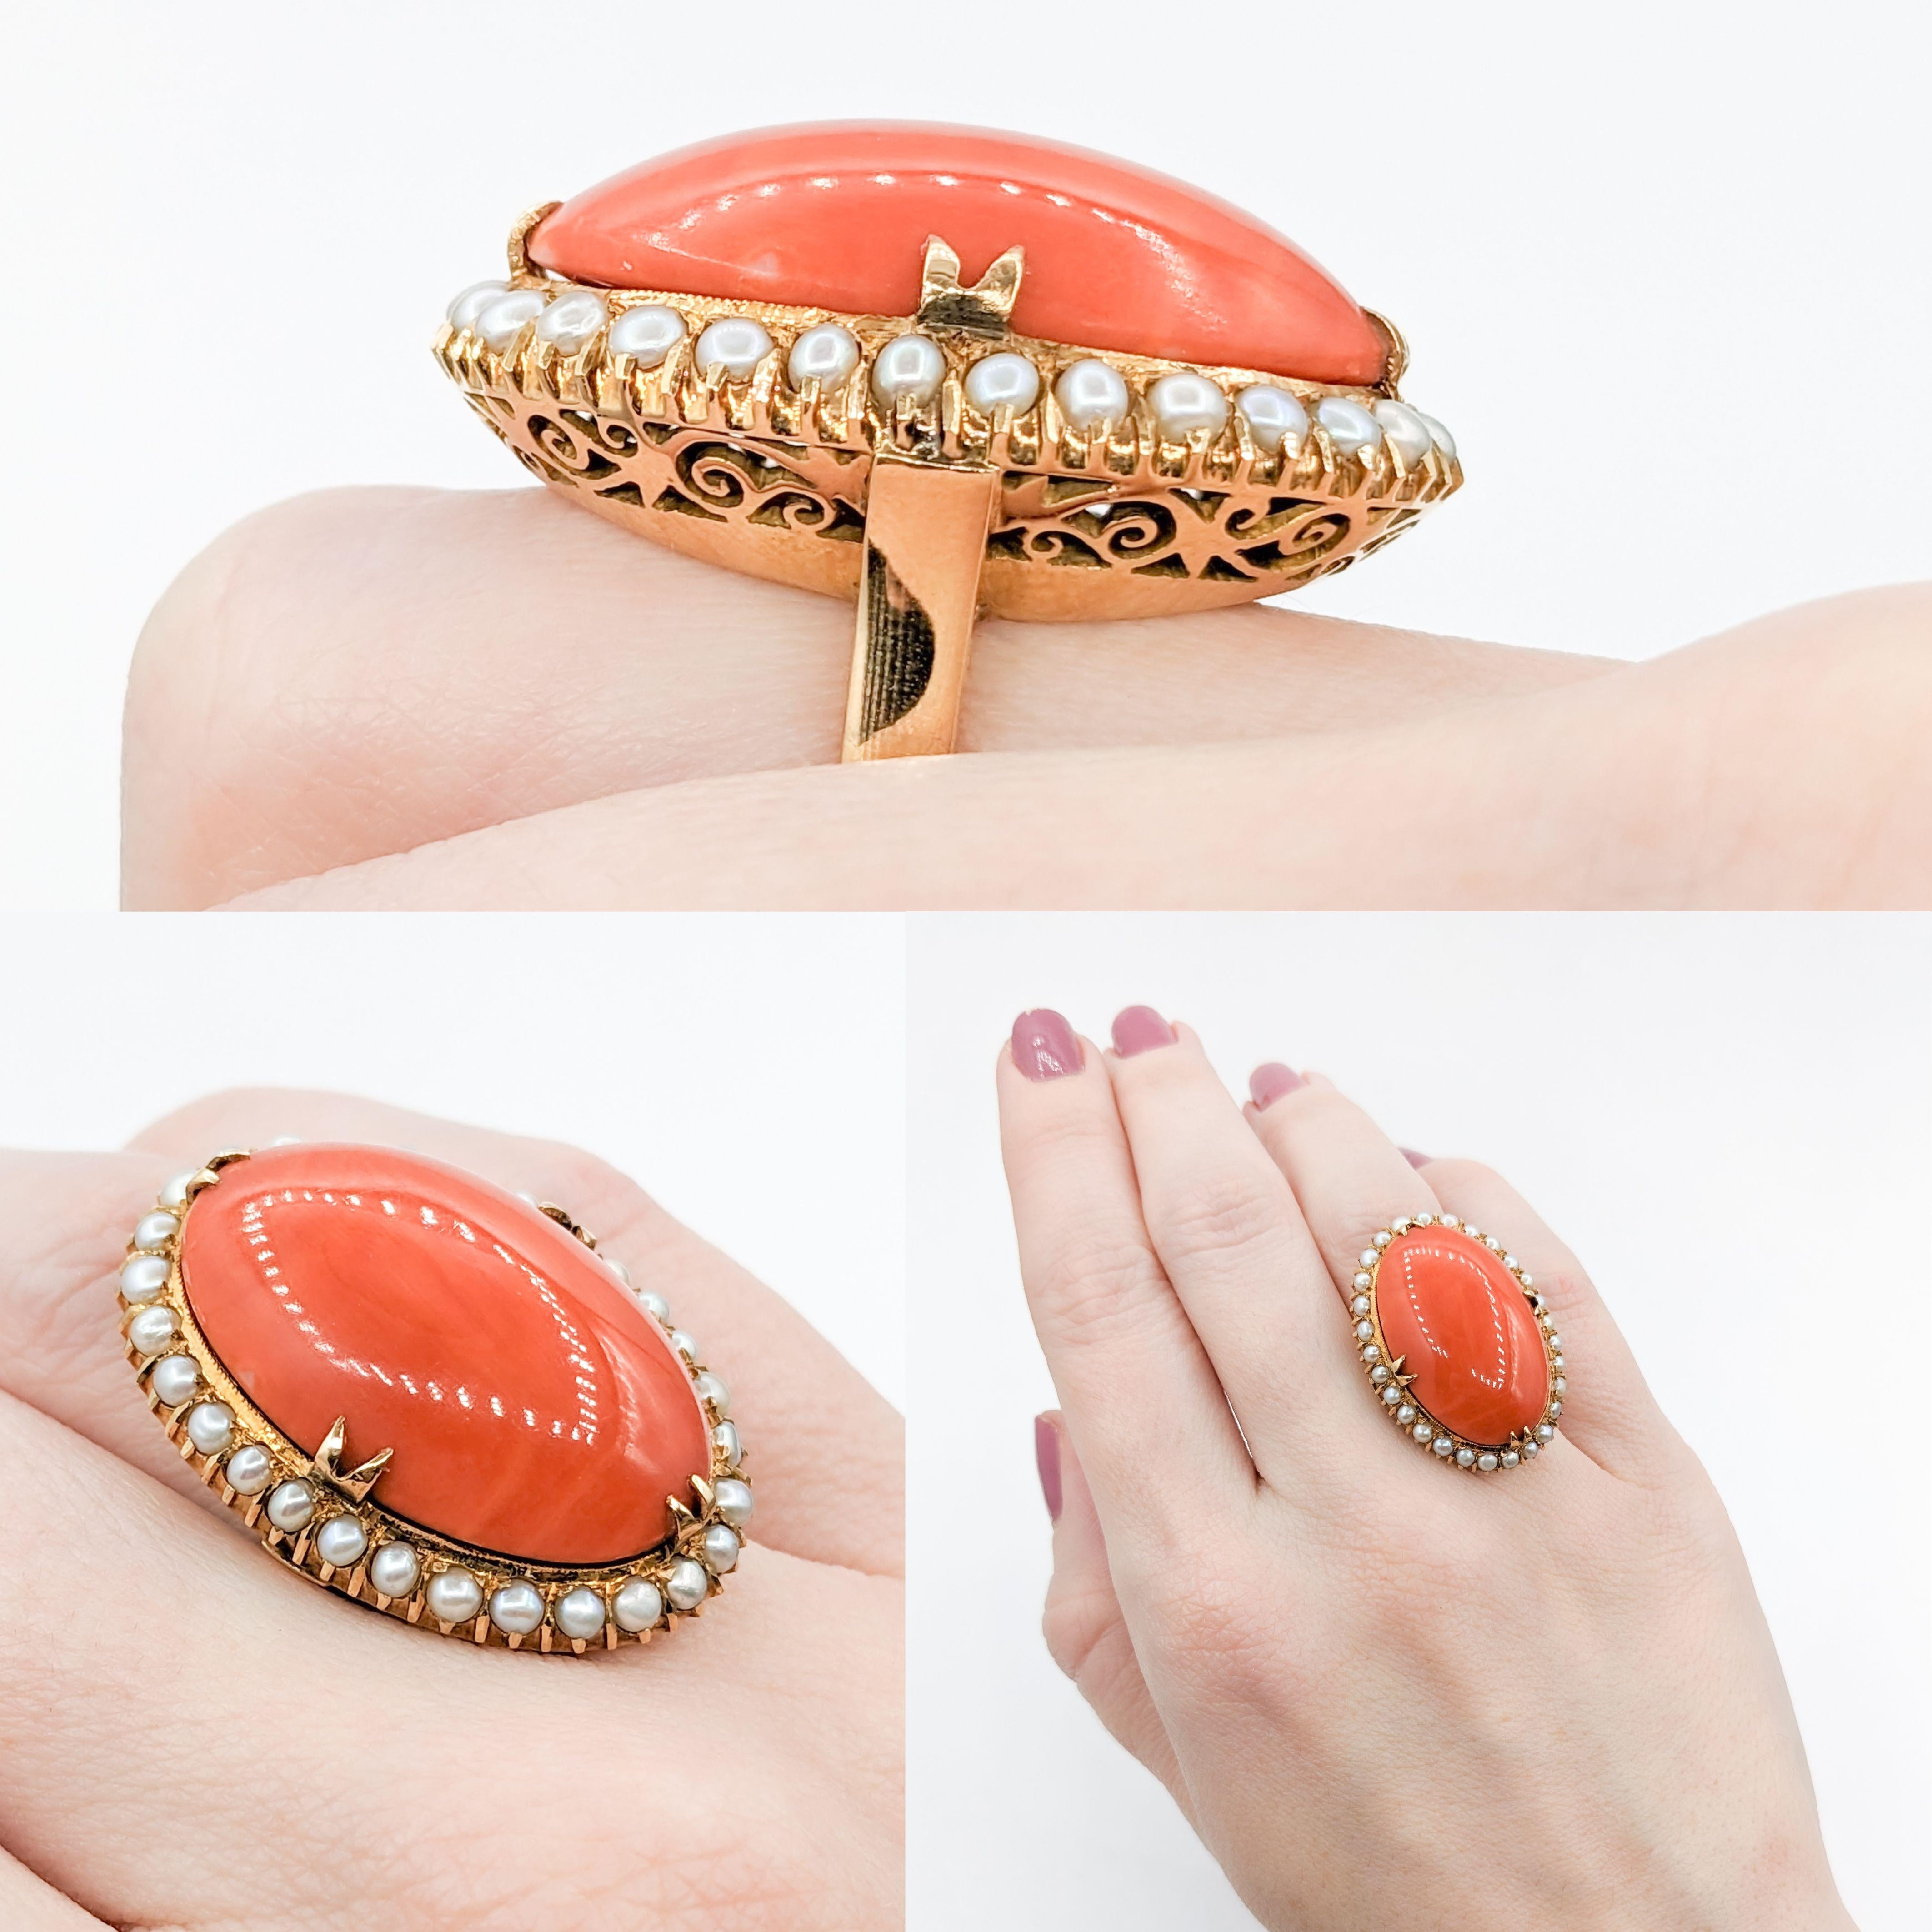 Vibrant 18k Coral & Seed Pearl Cocktail Ring

Introducing this exquisite vintage coral cocktail ring. Expertly crafted in 18k yellow gold, it prominently features a radiant 27x16mm oval Coral cabochon in a vibrant reddish-orange color. The stunning